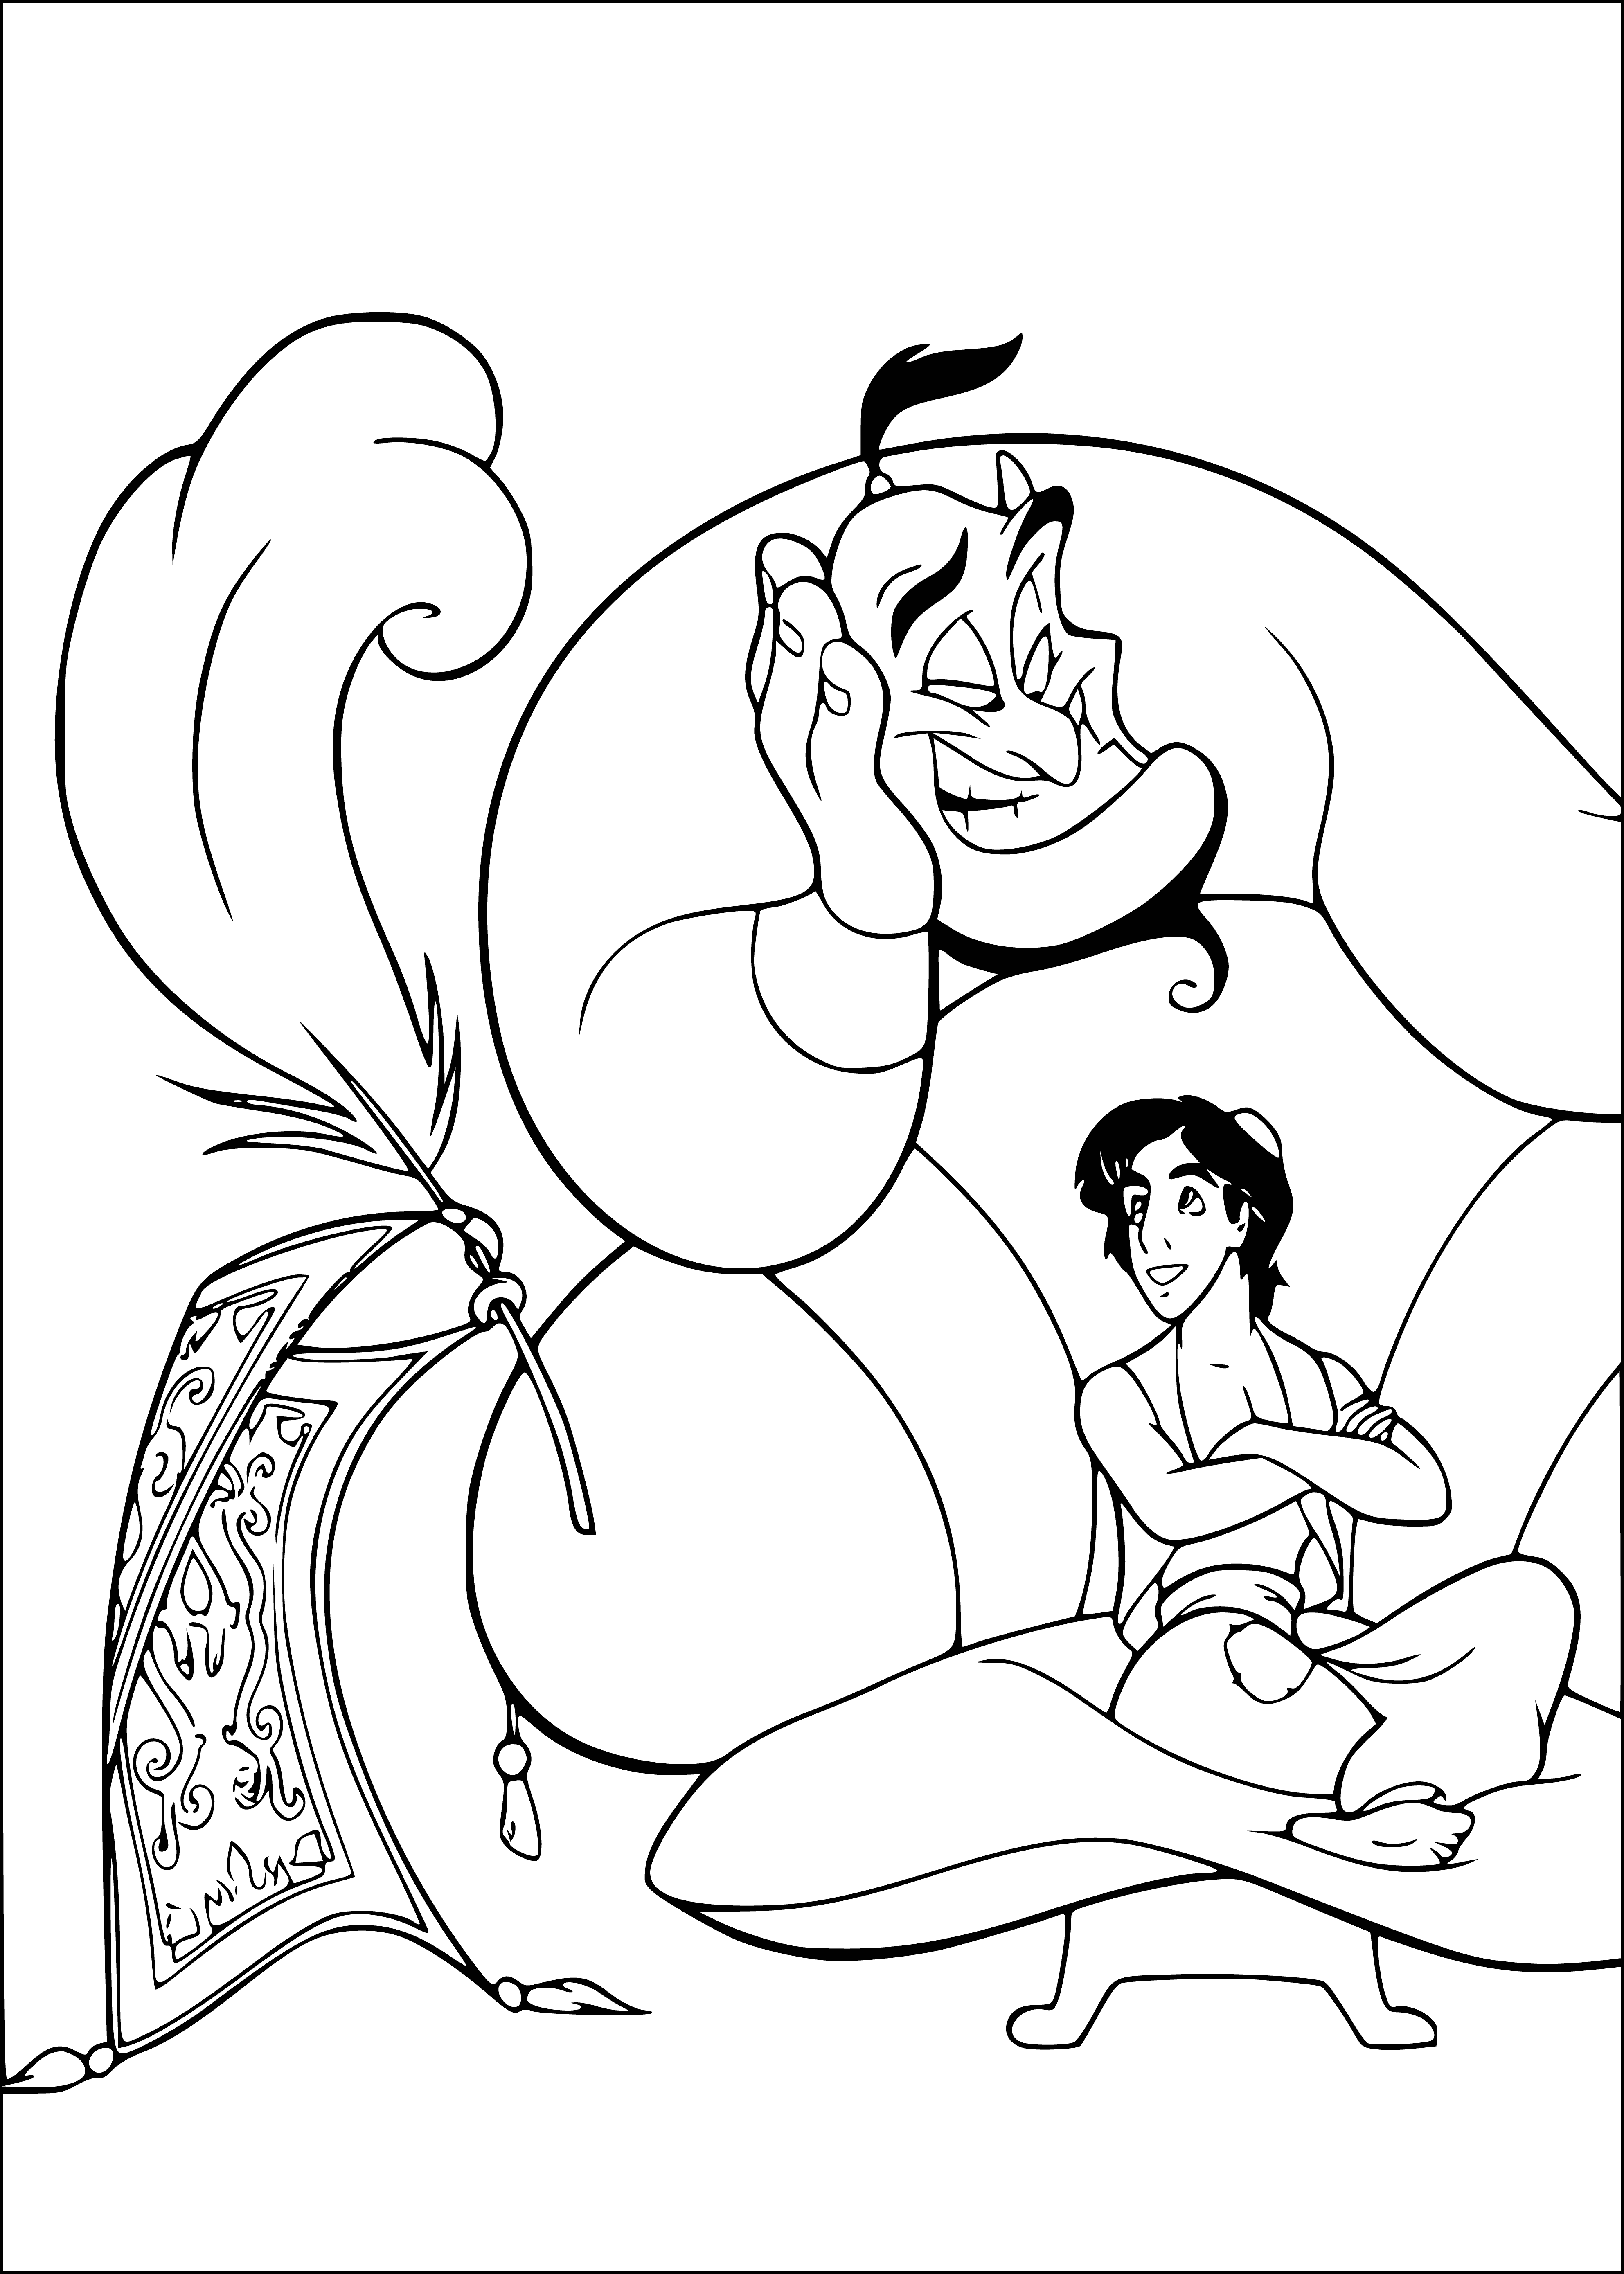 Ginny and Aladdin coloring page